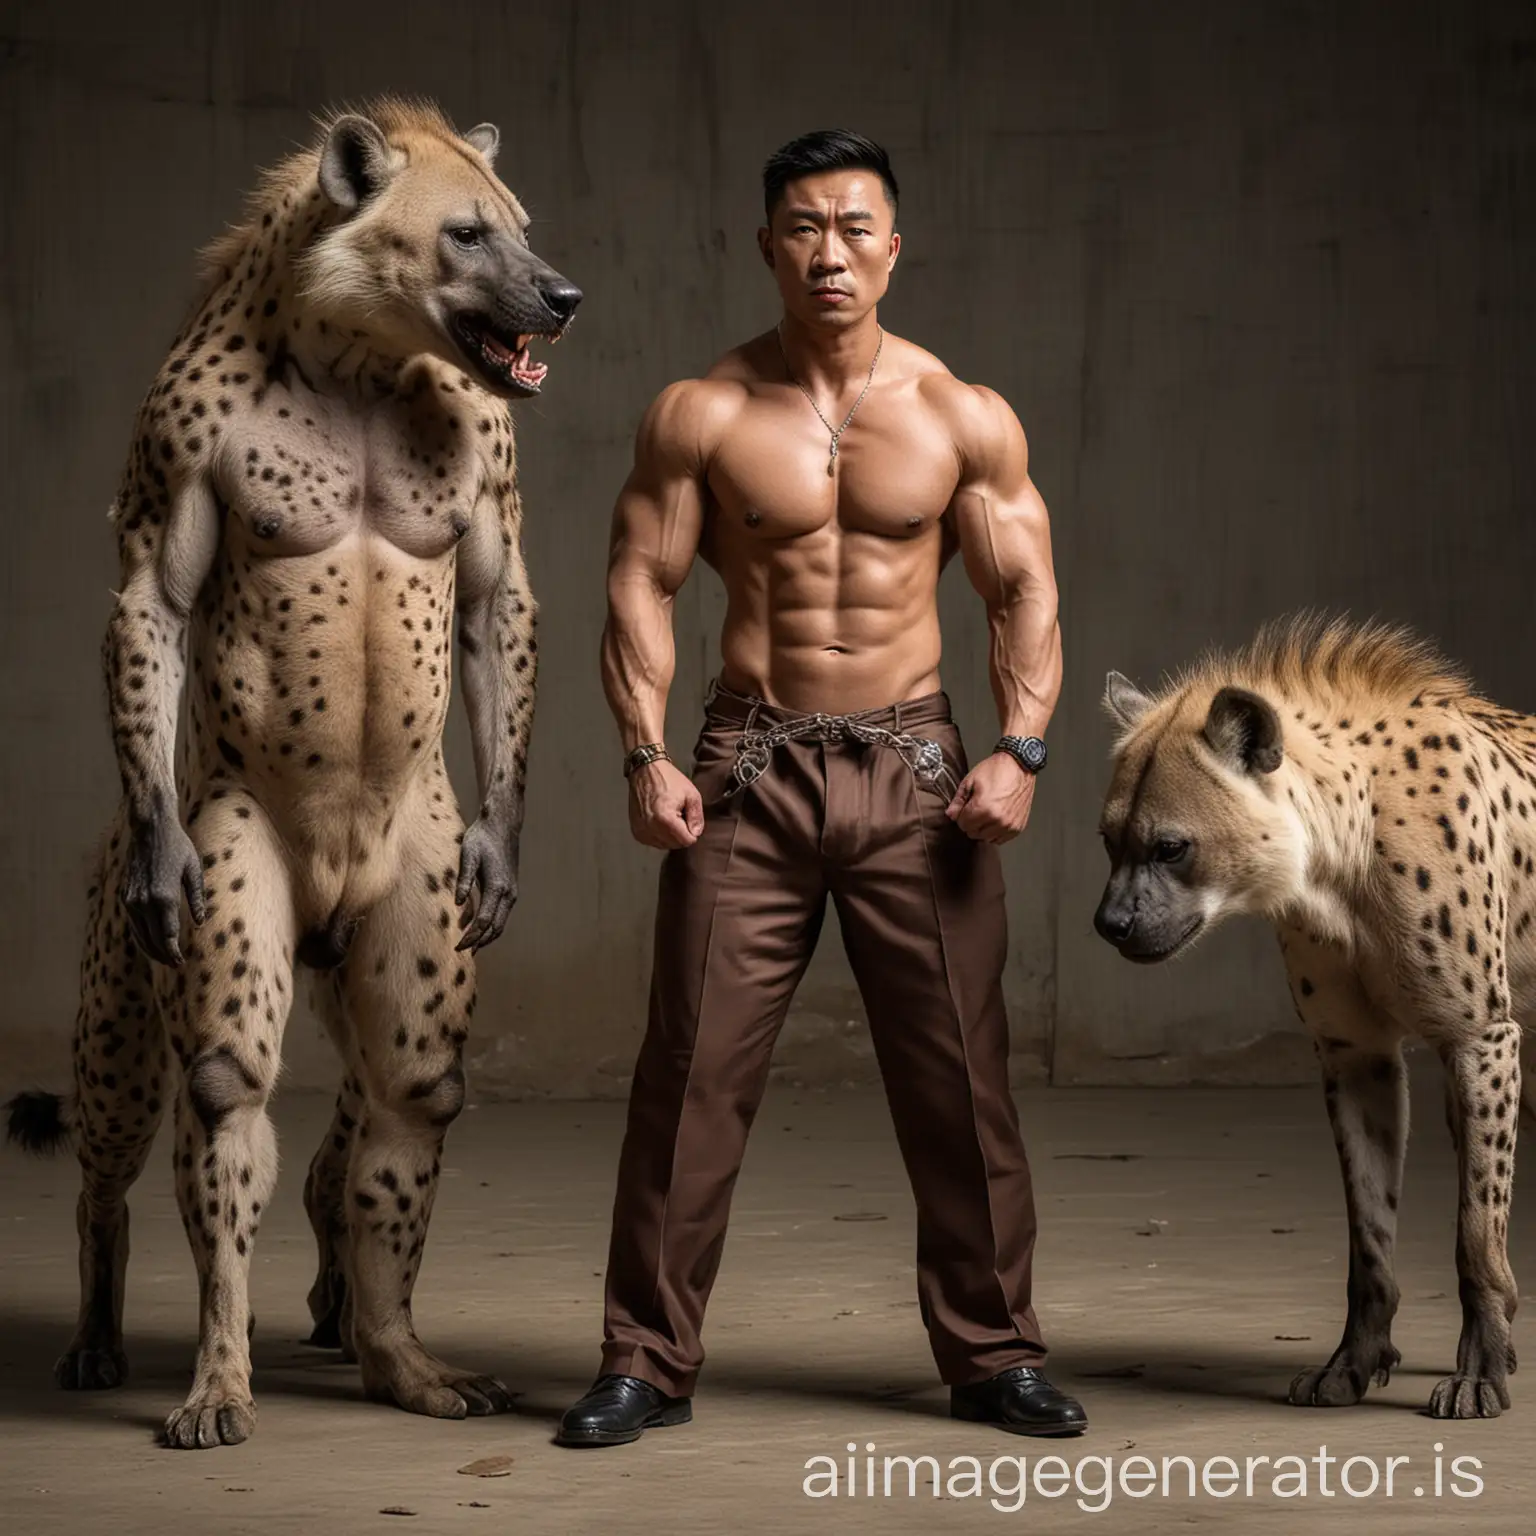 dressed boss chinese muscle man standing, arounded two normal size hyenas whos towards him